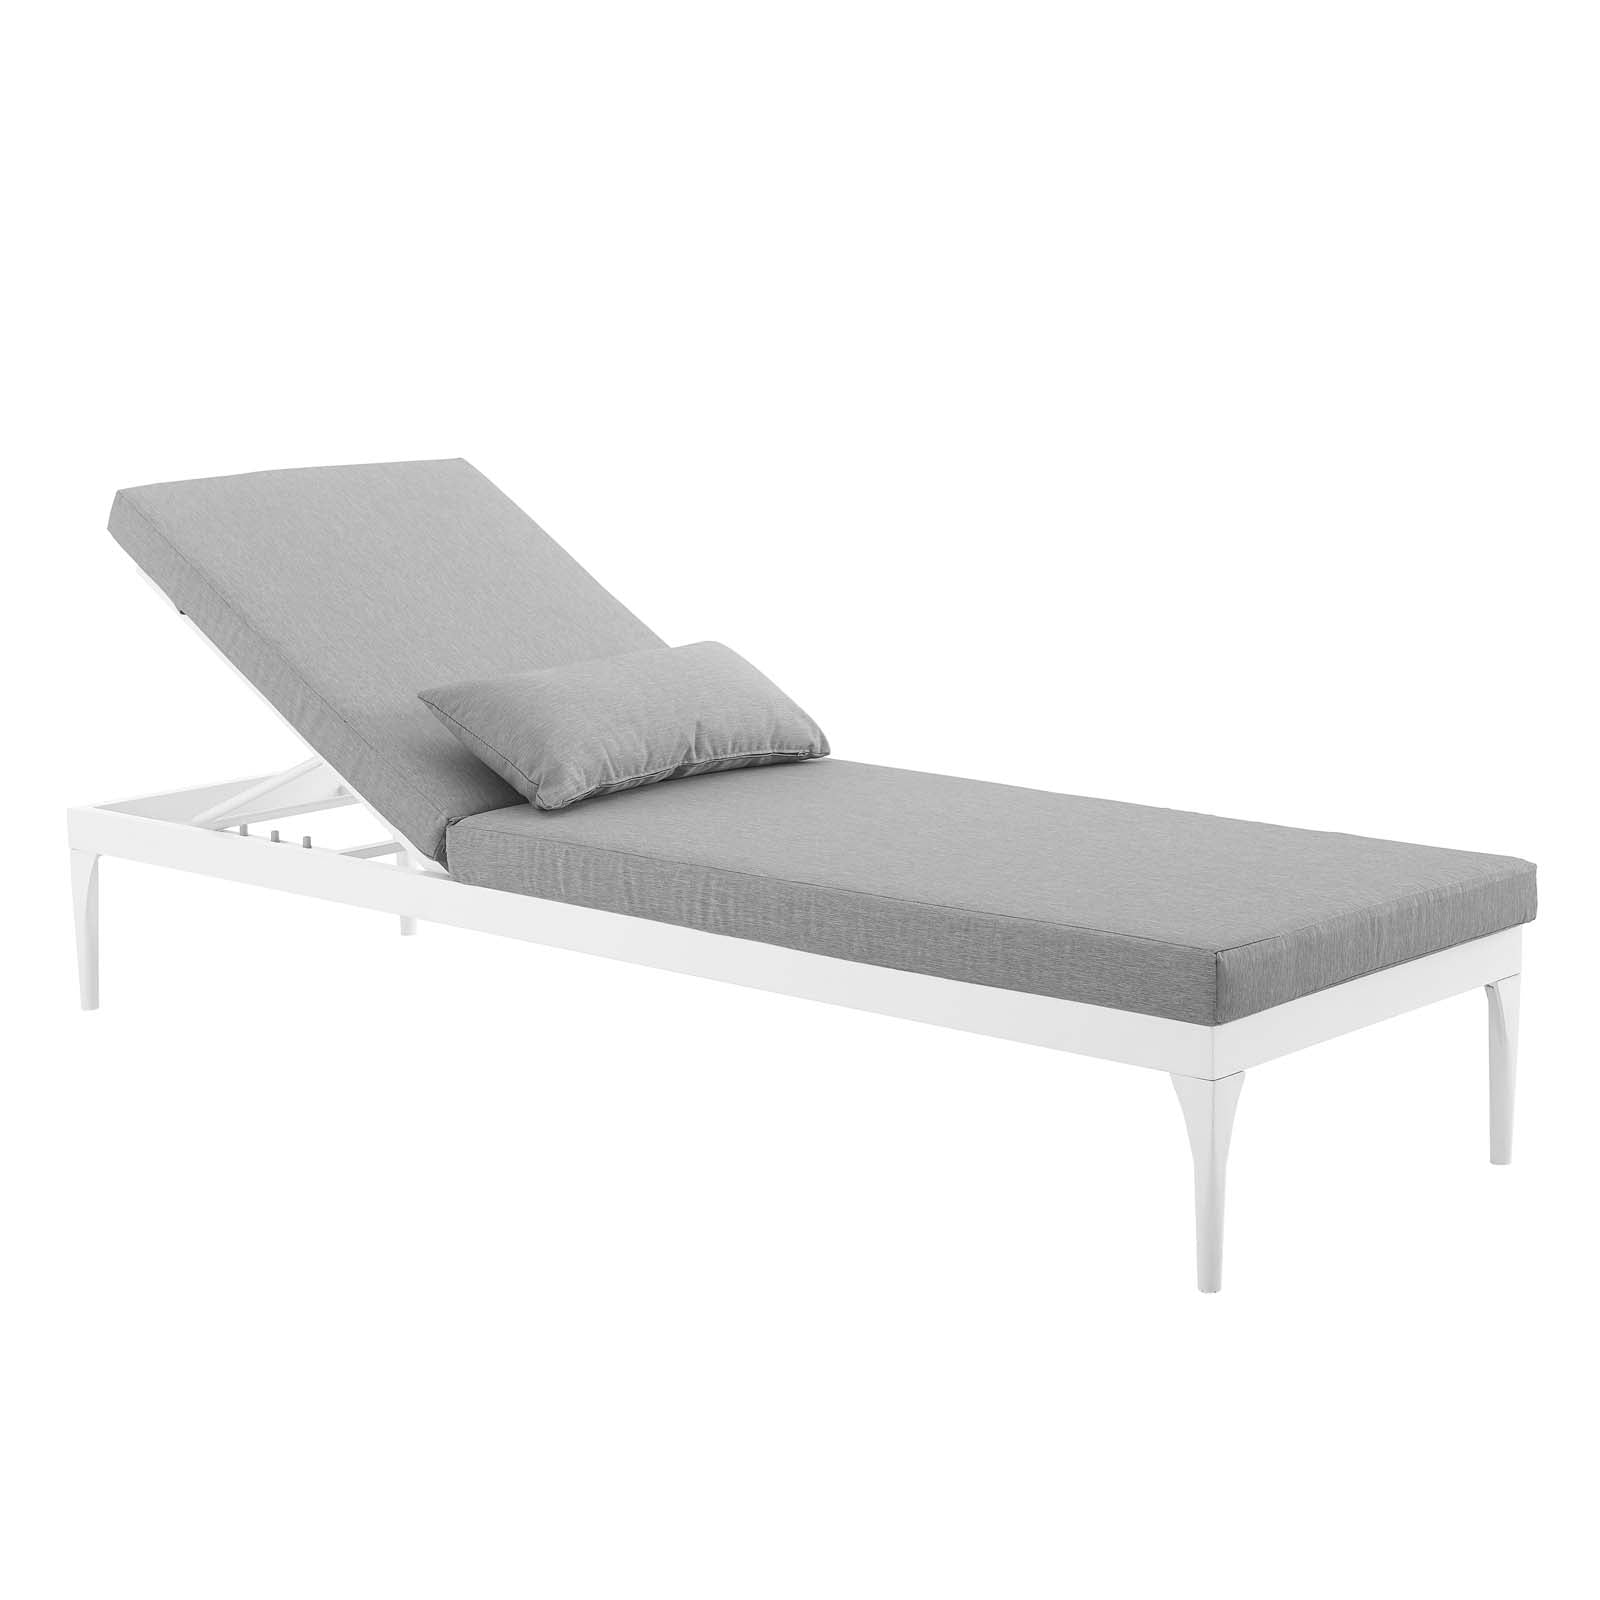 Modway Outdoor Loungers - Perspective Cushion Outdoor Patio Chaise Lounge Chair White Gray